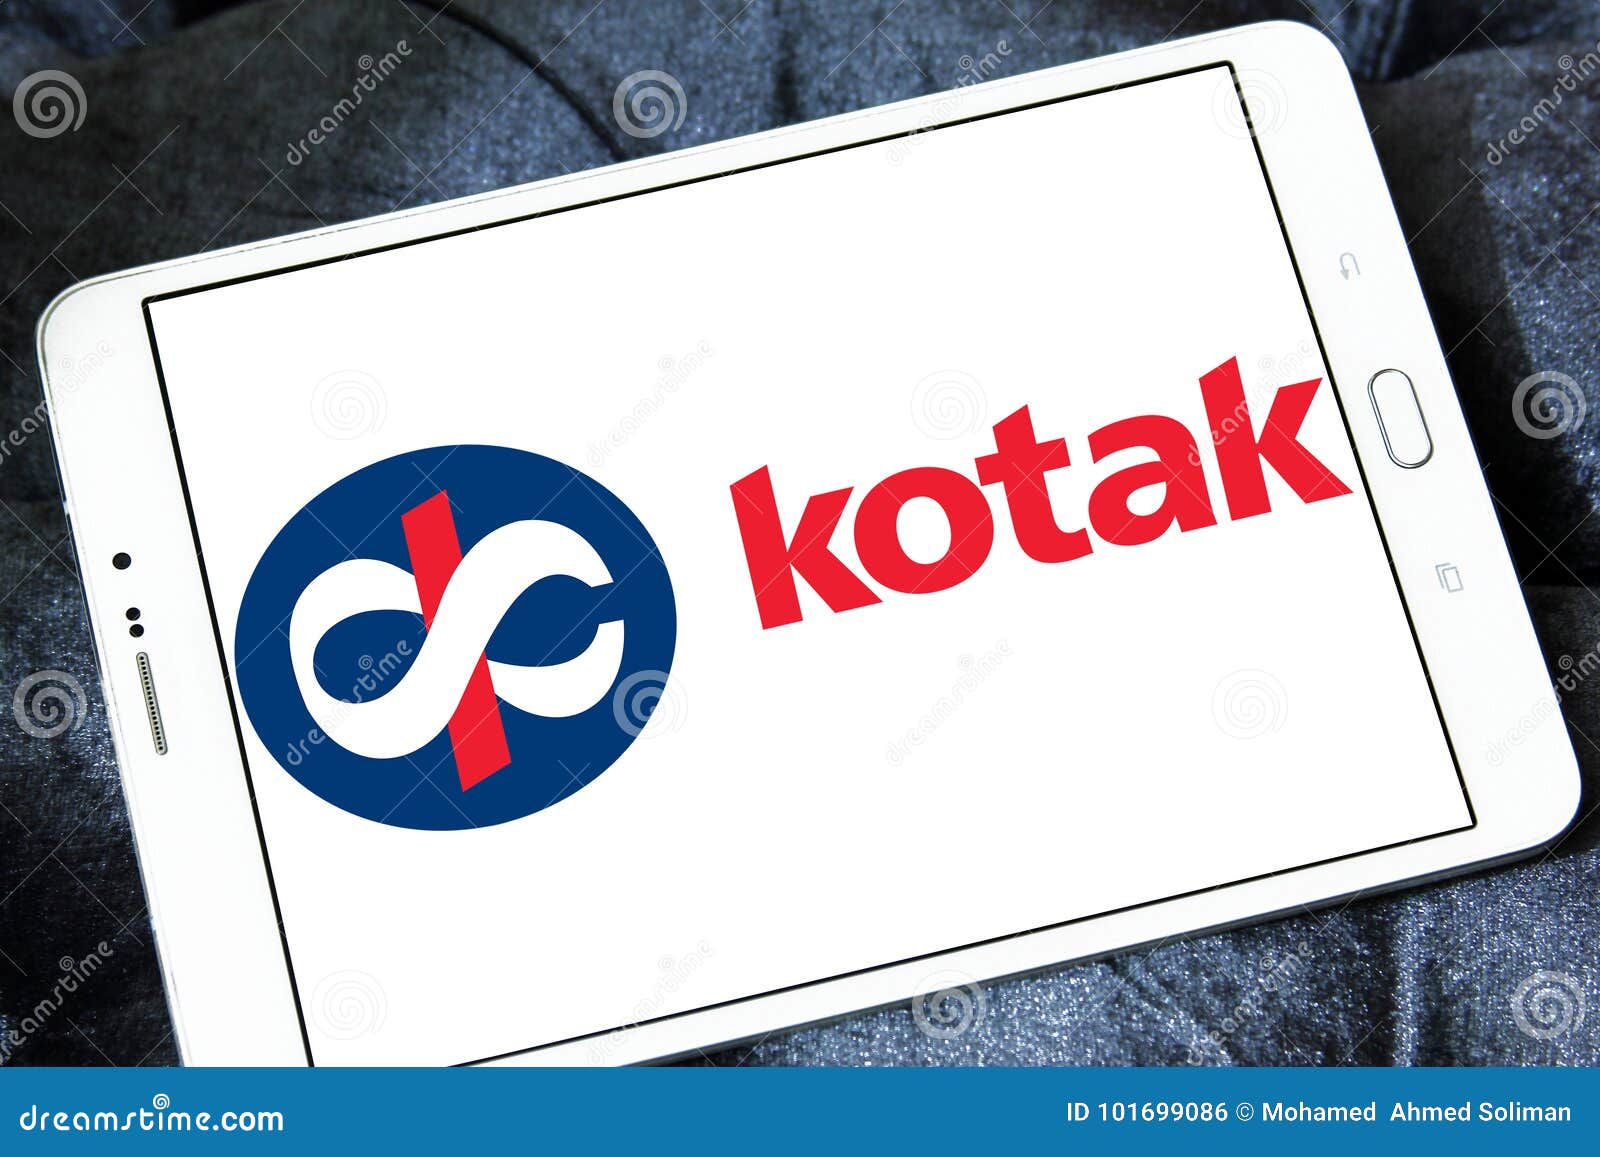 Our Symbol Our Corporate Identity Kotak Mahindra Bank